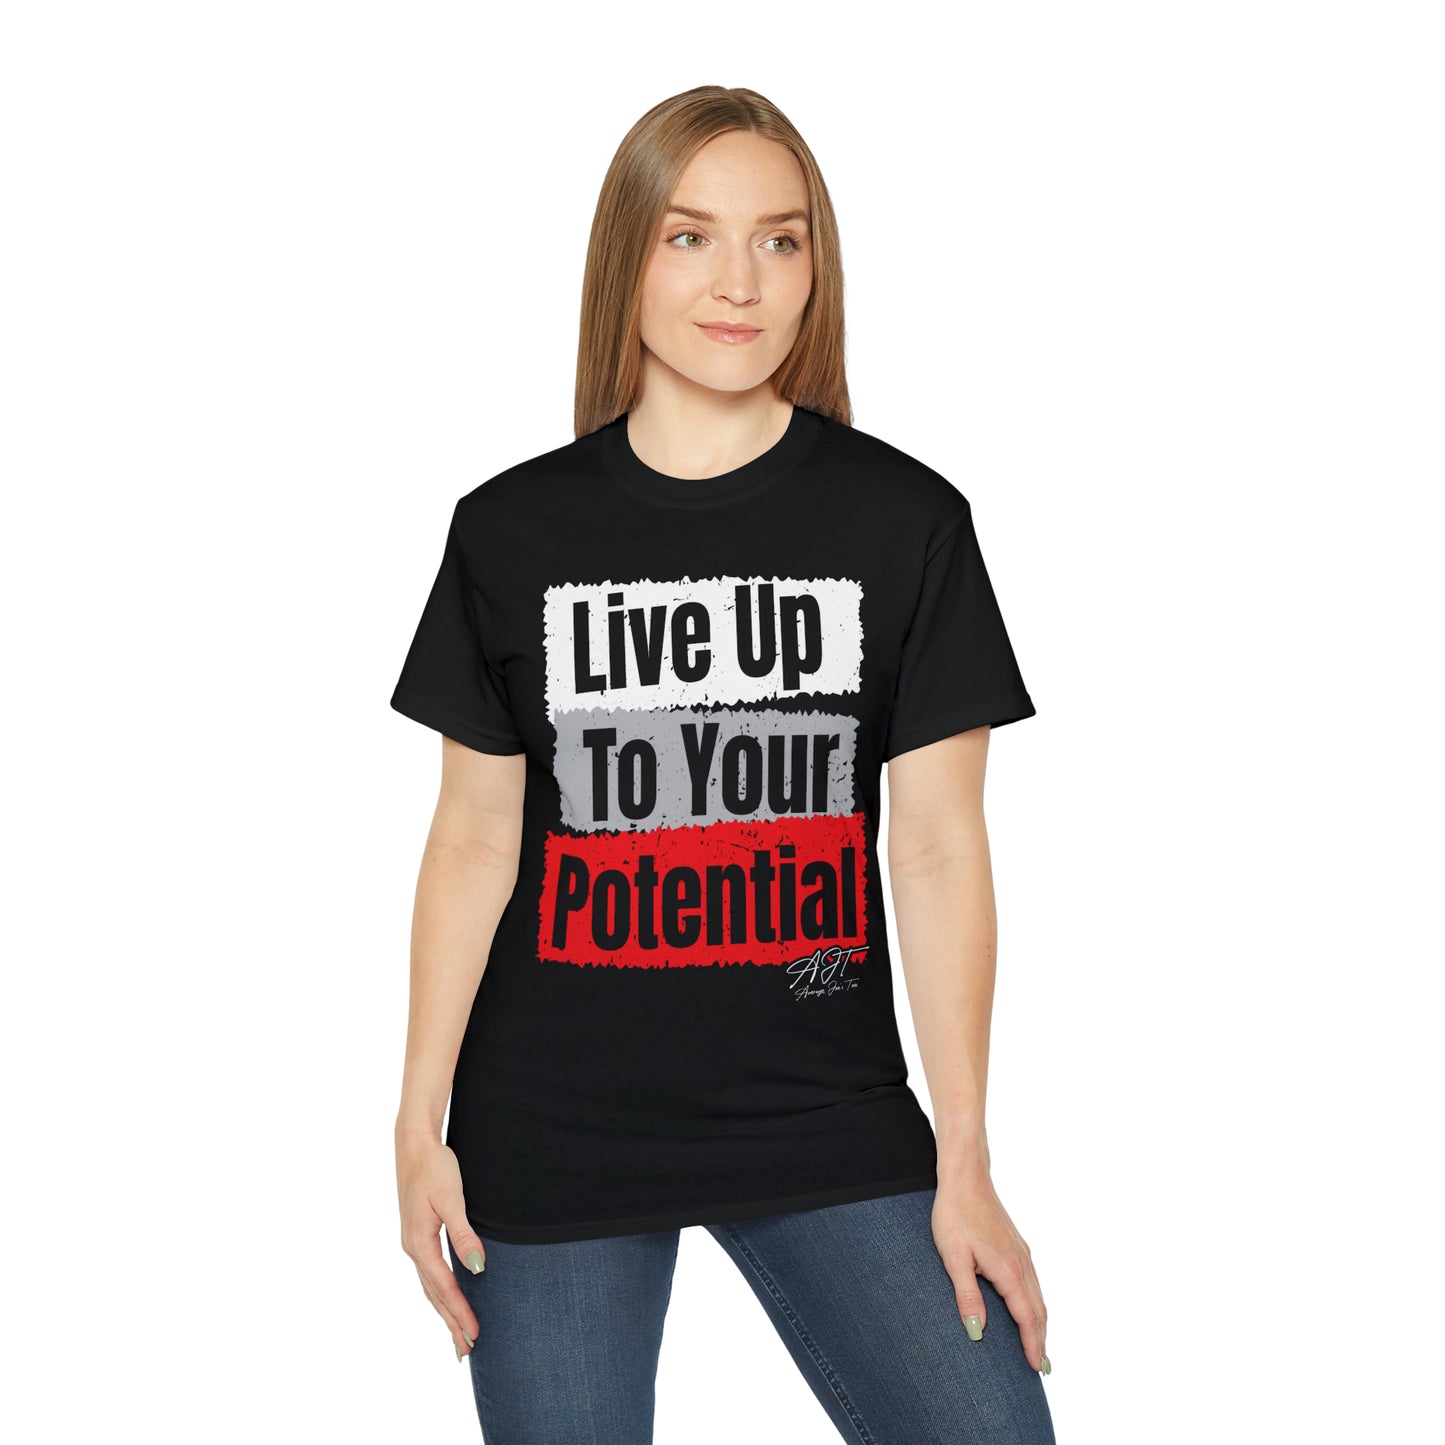 "Live Up To Your Potential" Cotton Tee